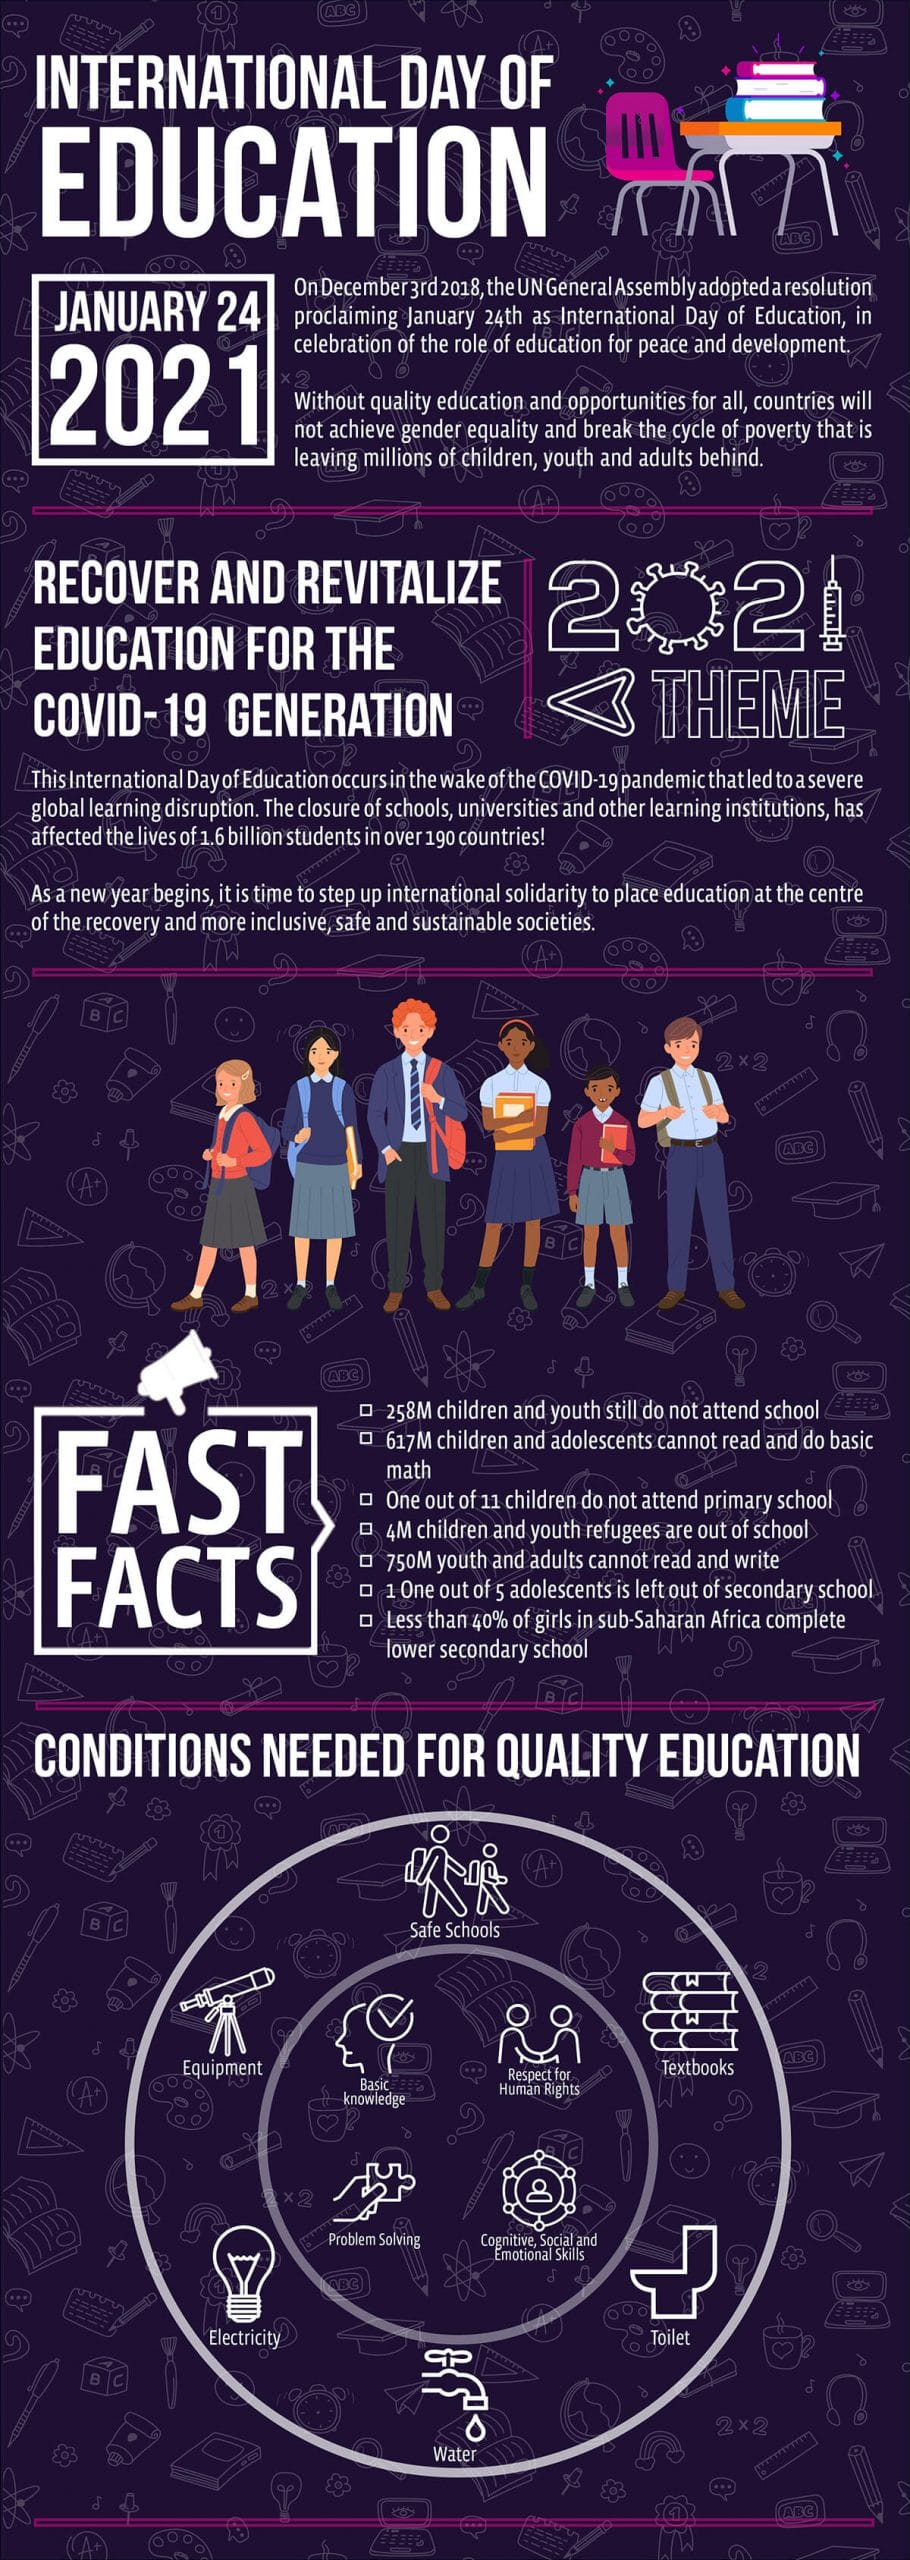 International Day of Education infographic by University of the People